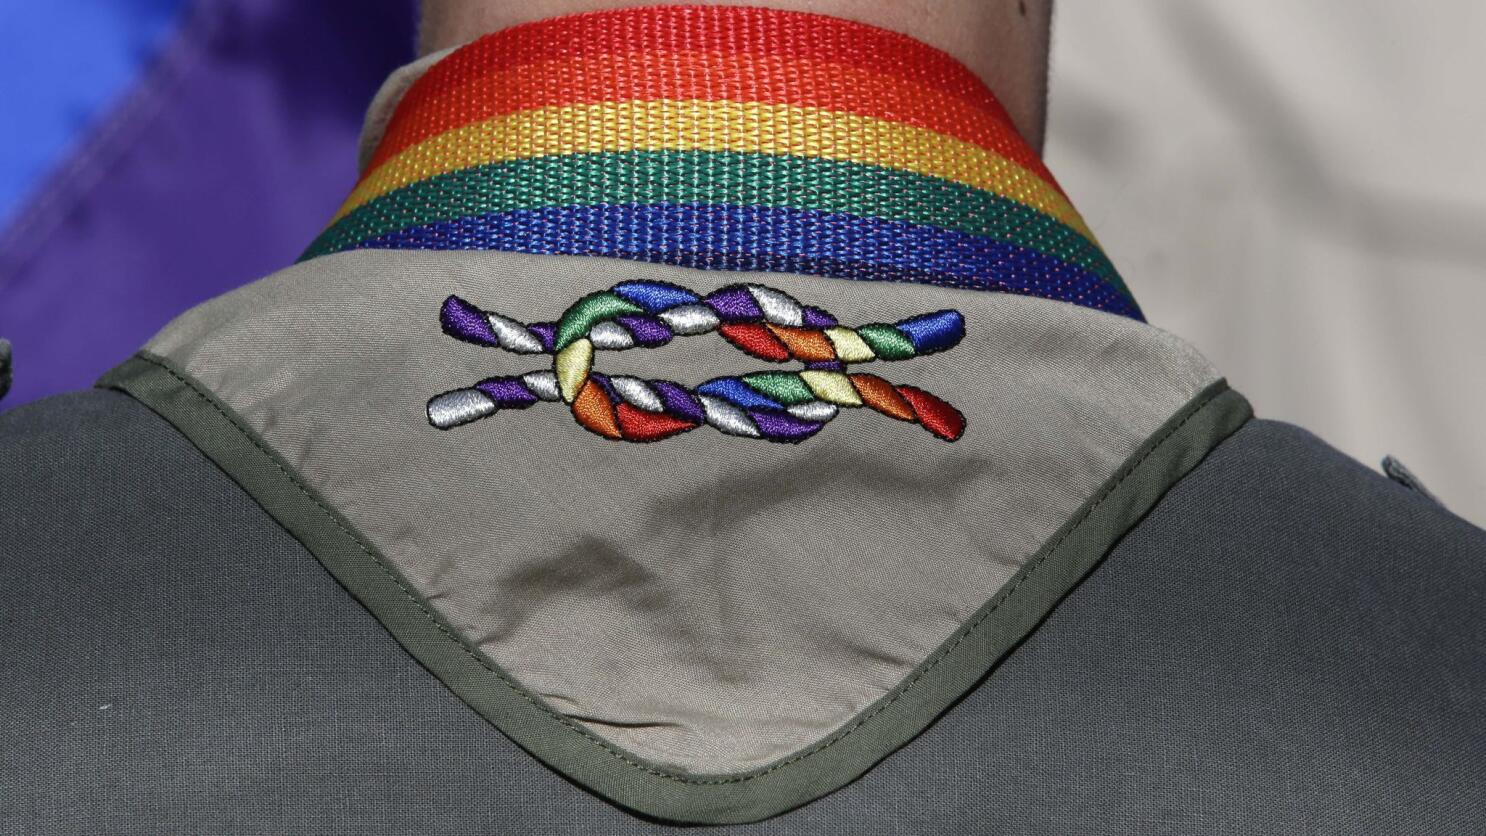 Here is how the Boy Scouts has evolved on social issues over the